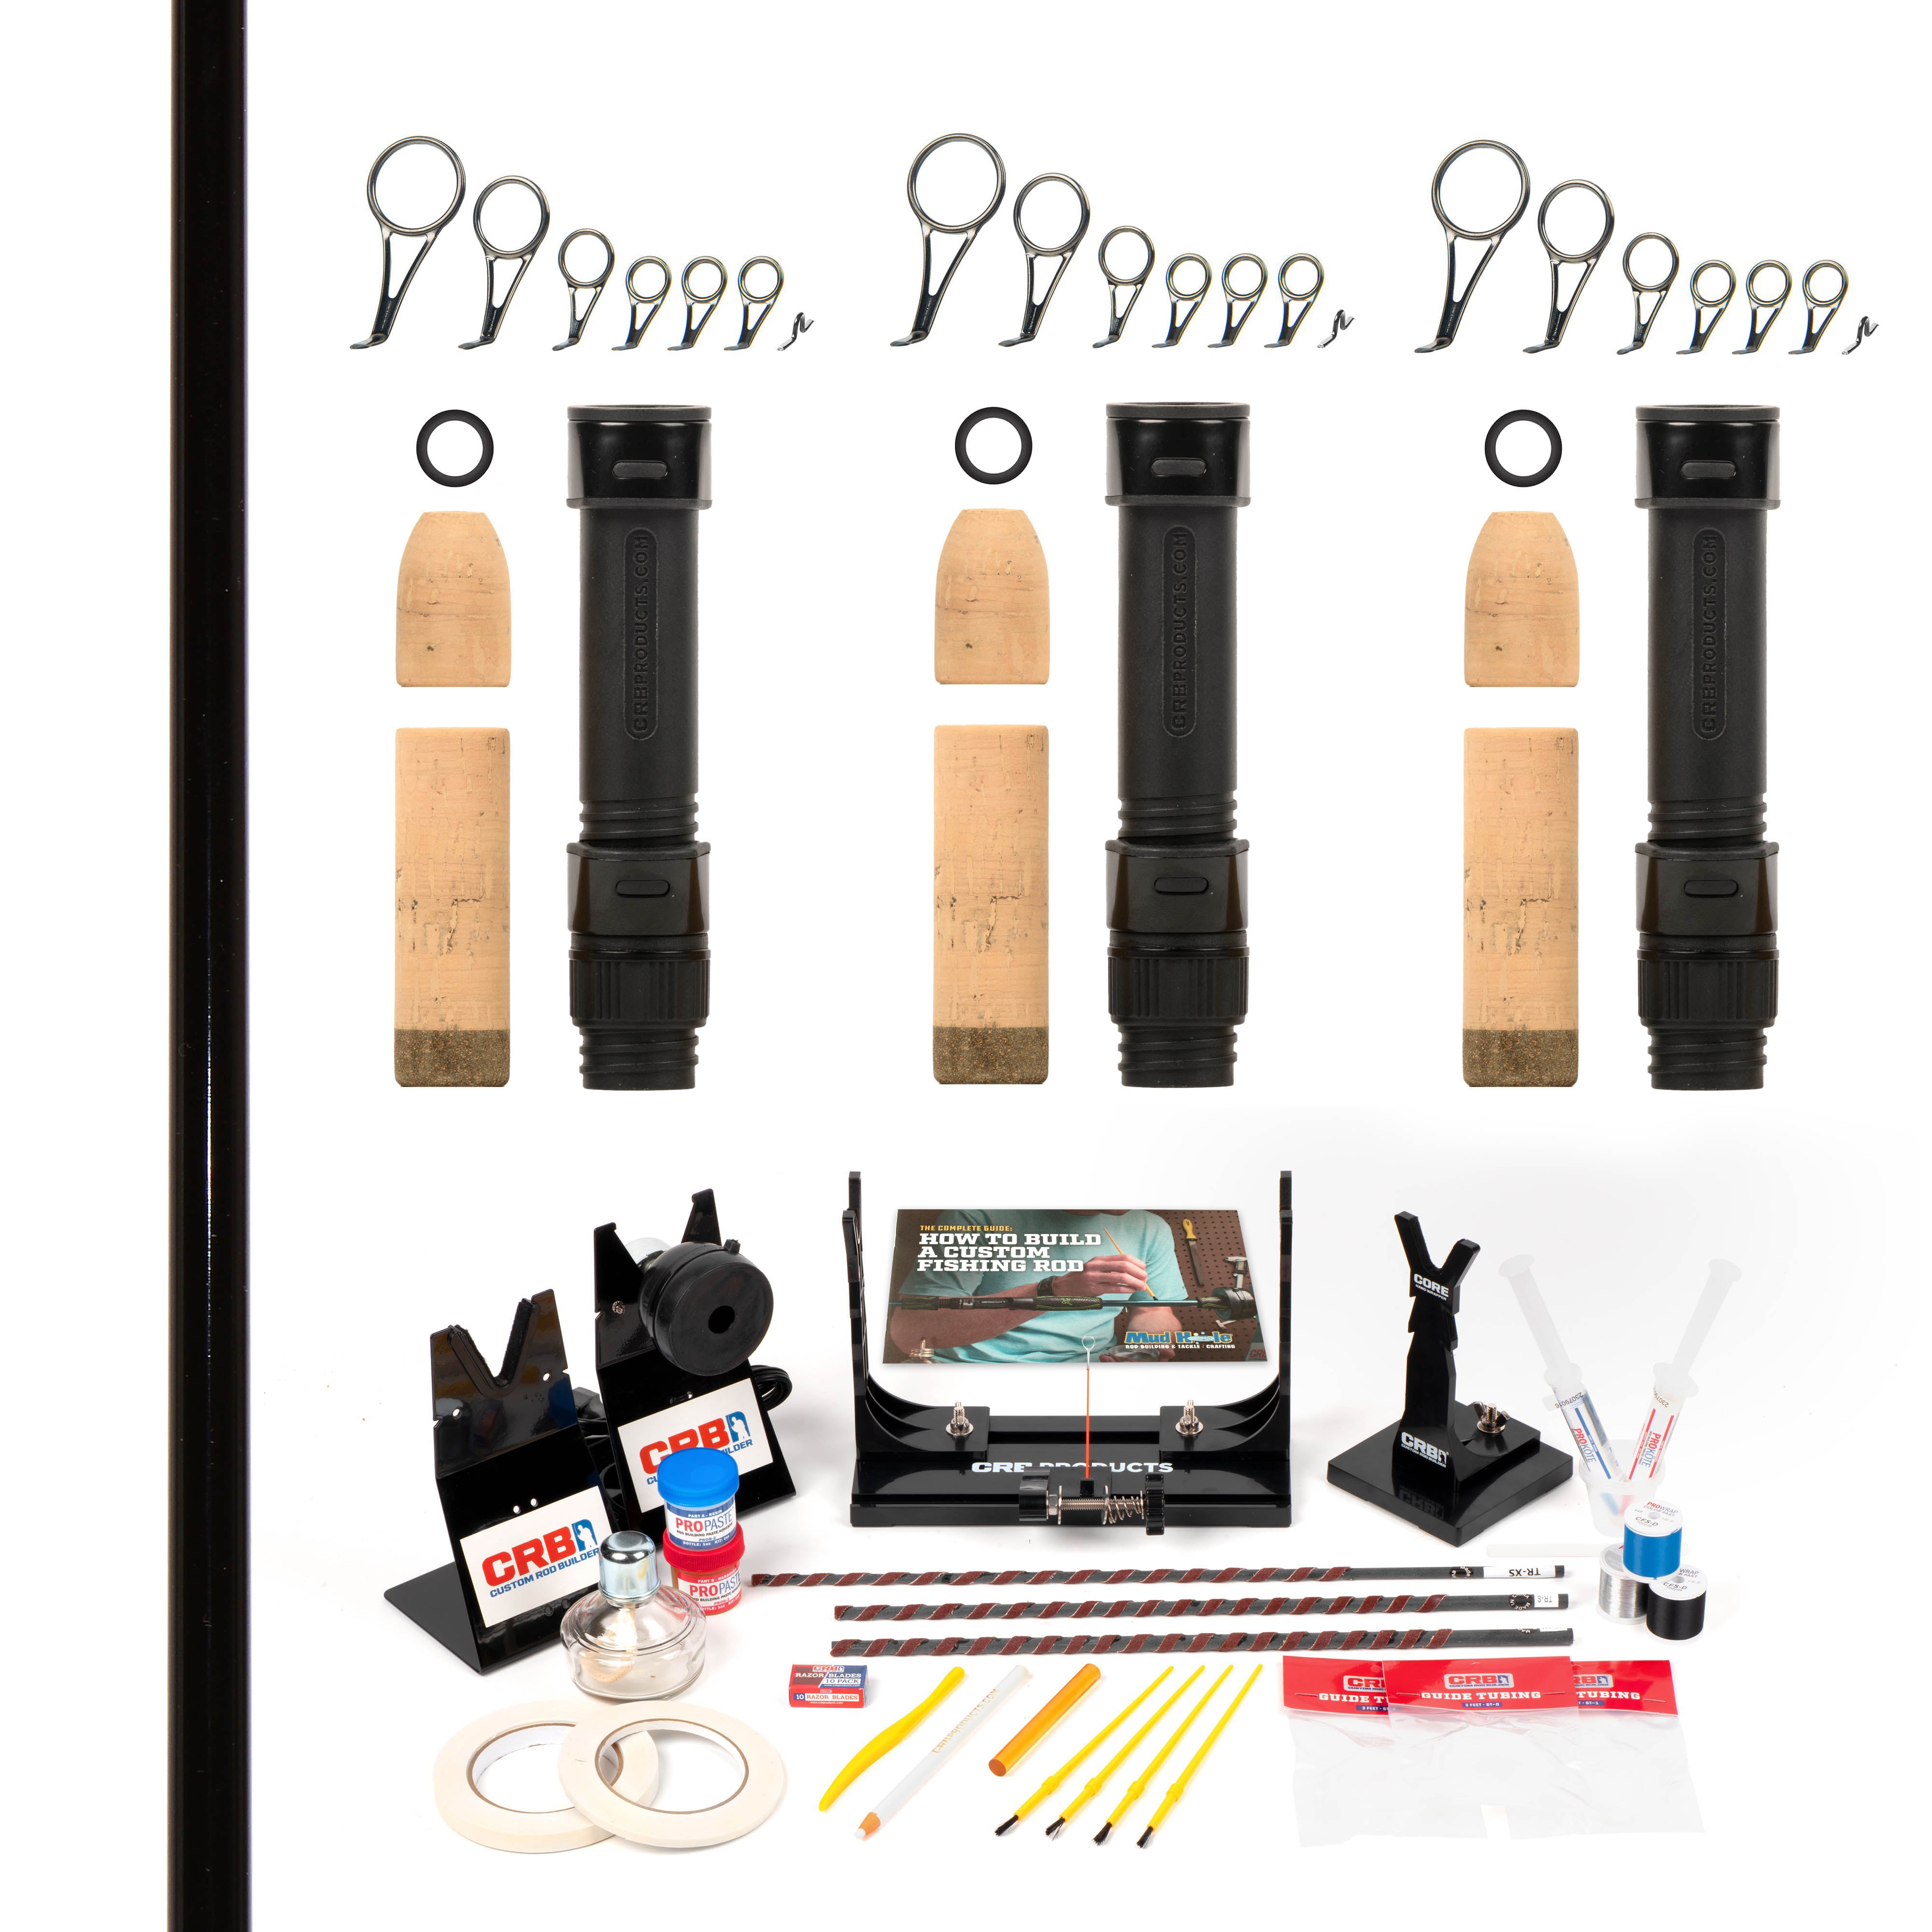 All In One Rod Building Kit – Ice Fishing